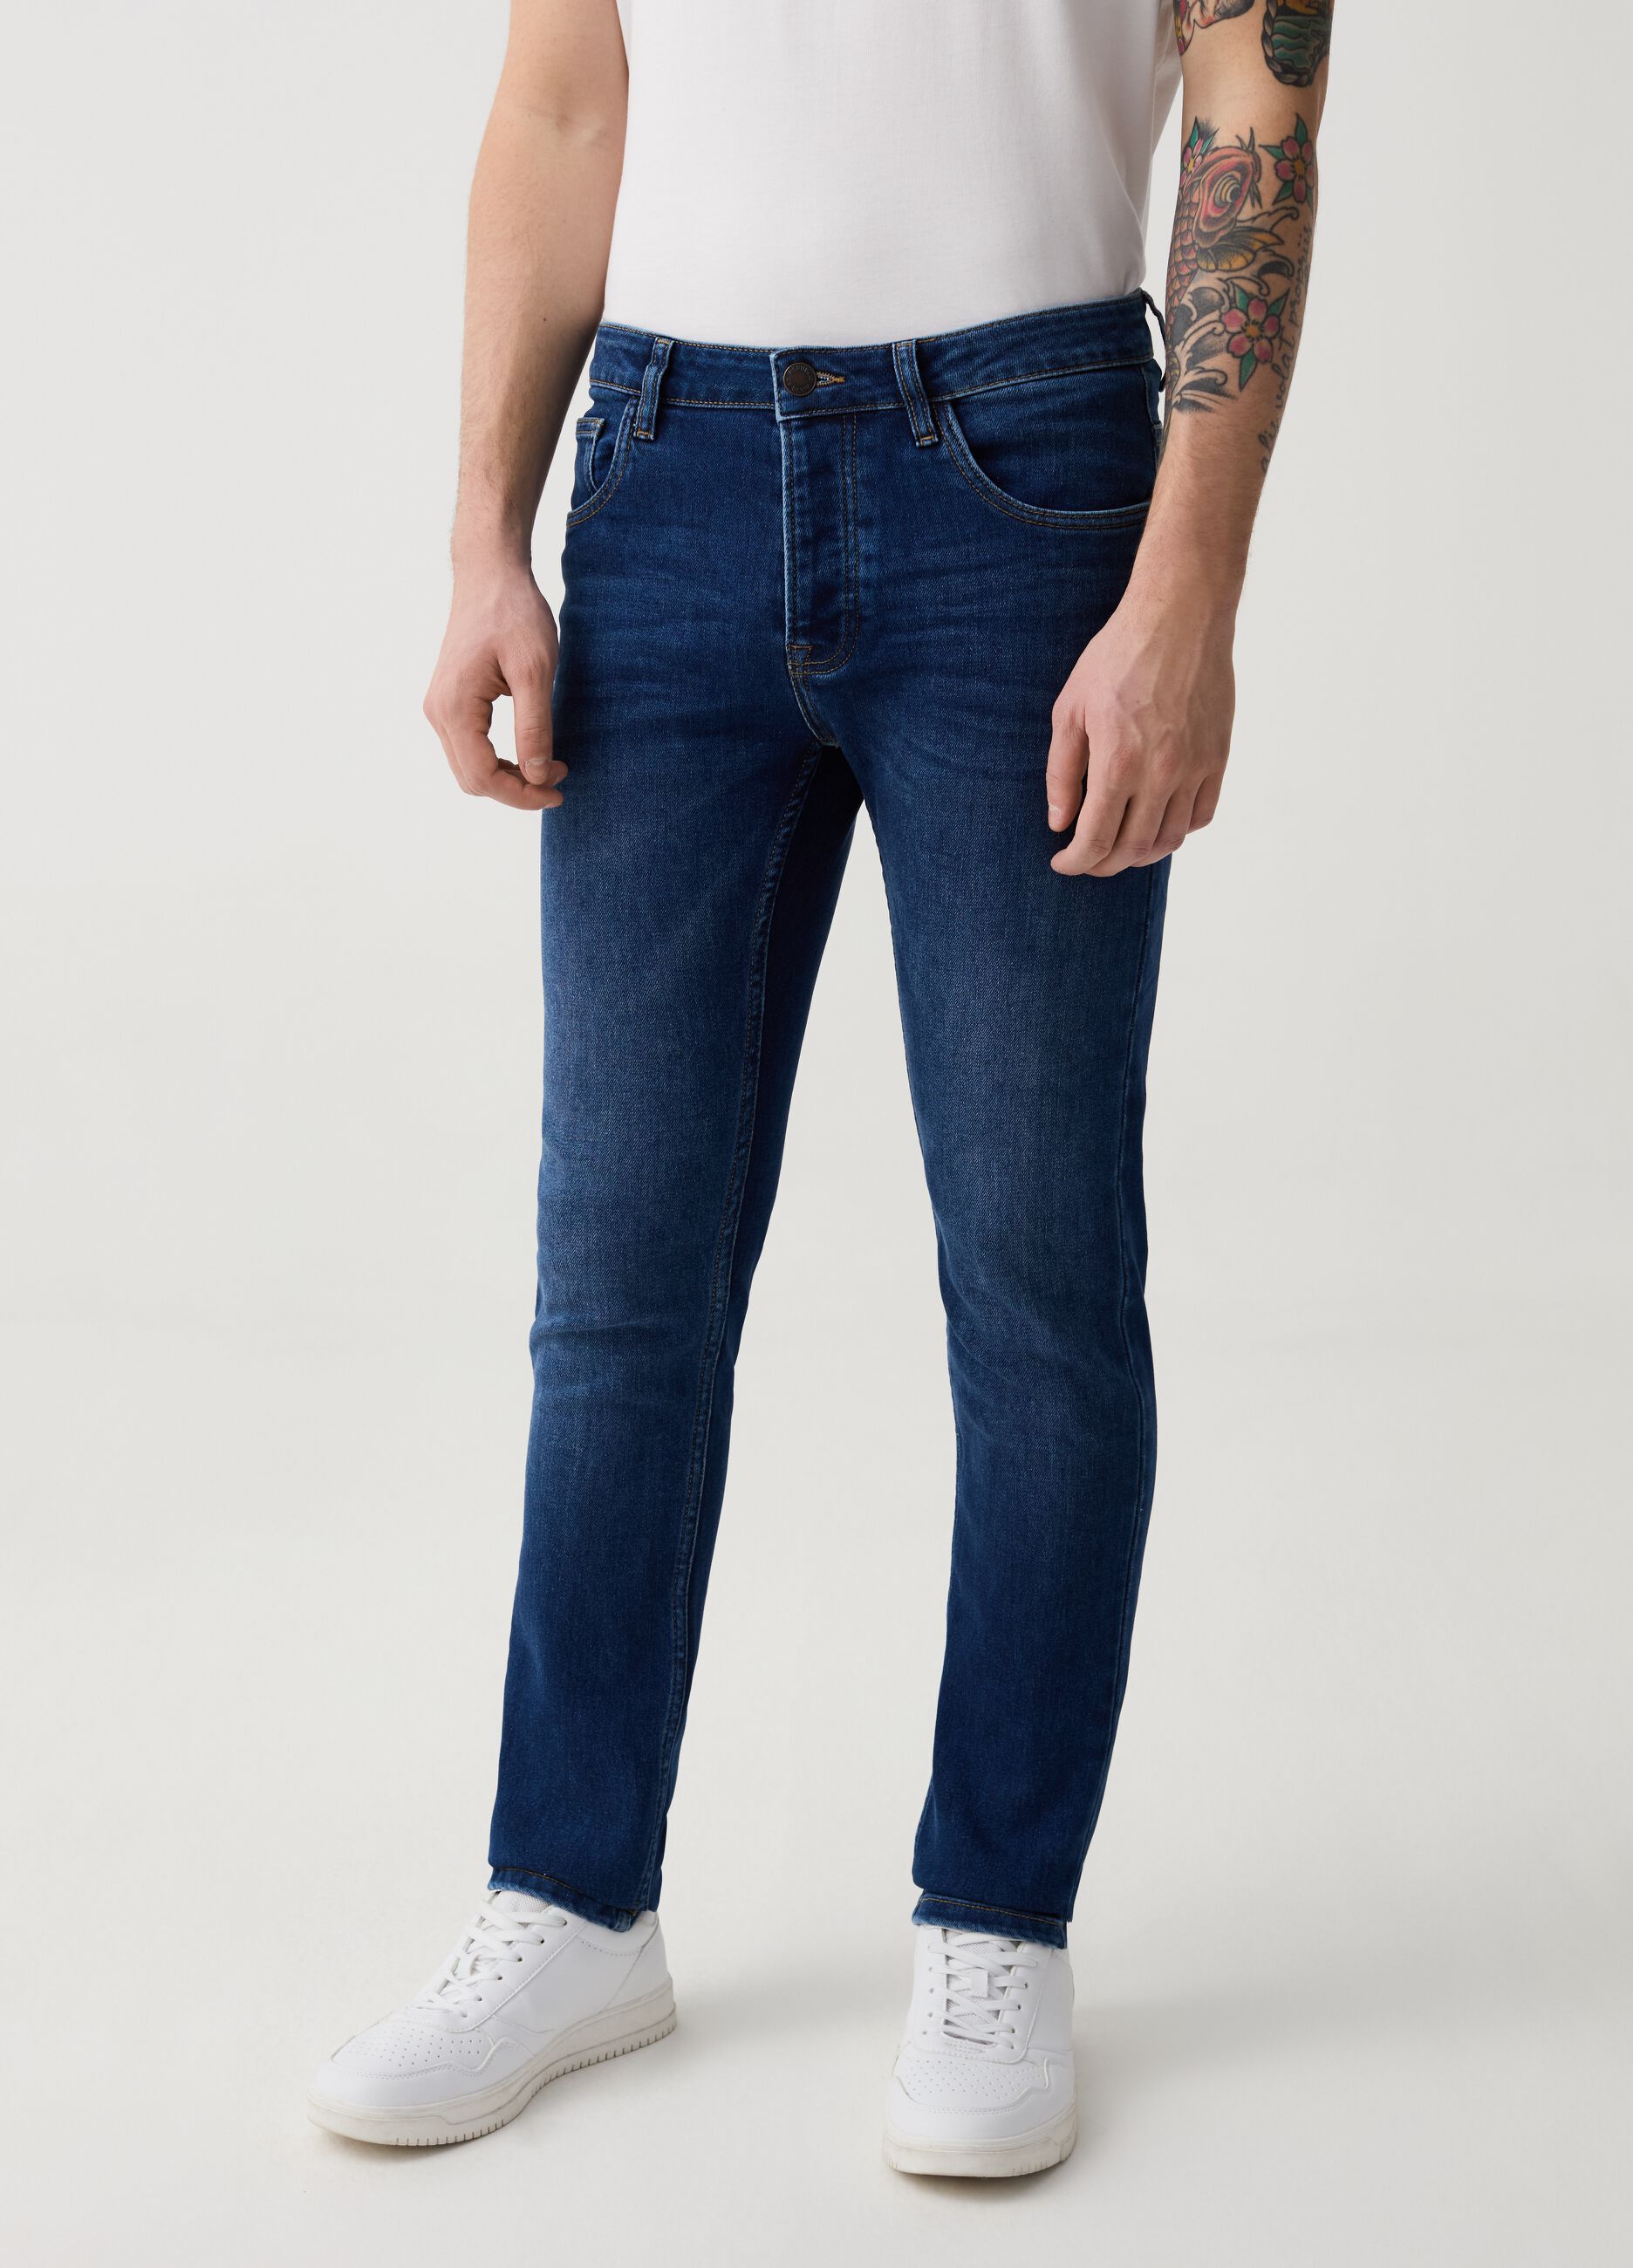 Skinny-fit jeans in Coolmax® fabric